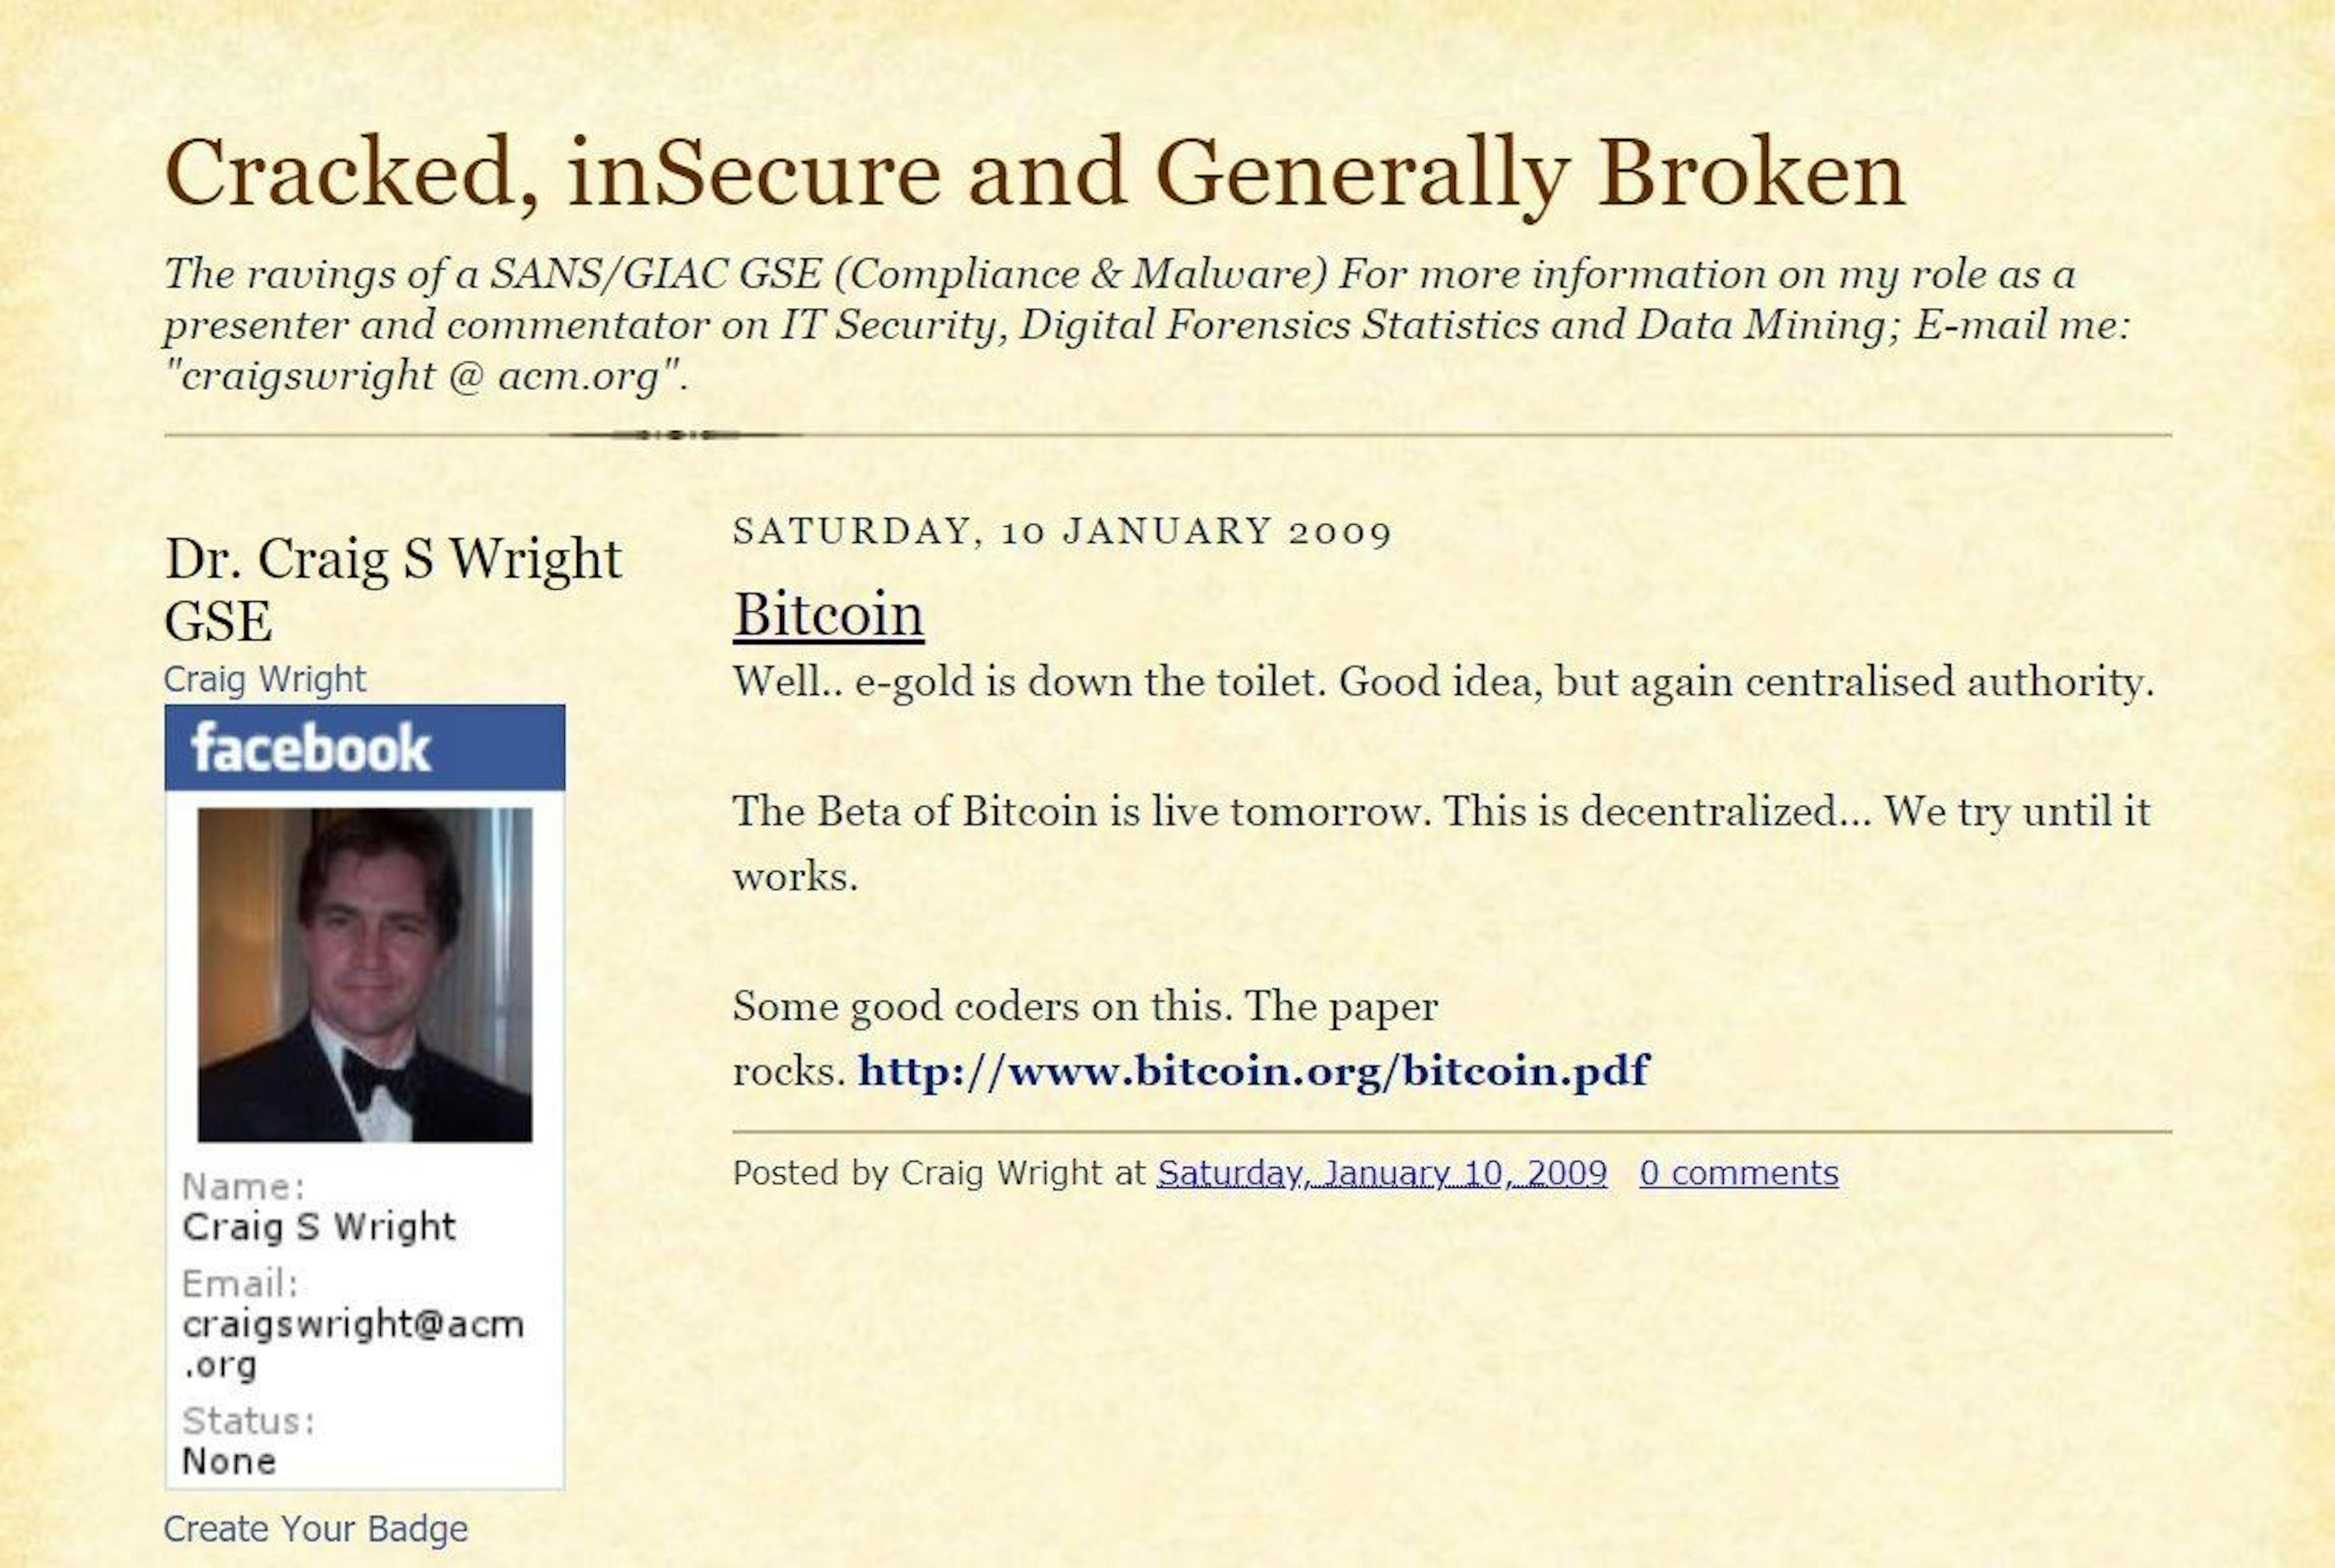 In 2014 and 2015, Craig Wright created several backdated blog posts, or altered existing ones. Here he claimed in a newly created, backdated blog post that Bitcoin Beta (oops, it was Alpha) went live on January 11, 2009 (and oops, that was supposed to be January 3, 2009, the first release of the Bitcoin software could be downloaded from SourceForge on January 8, 2009).